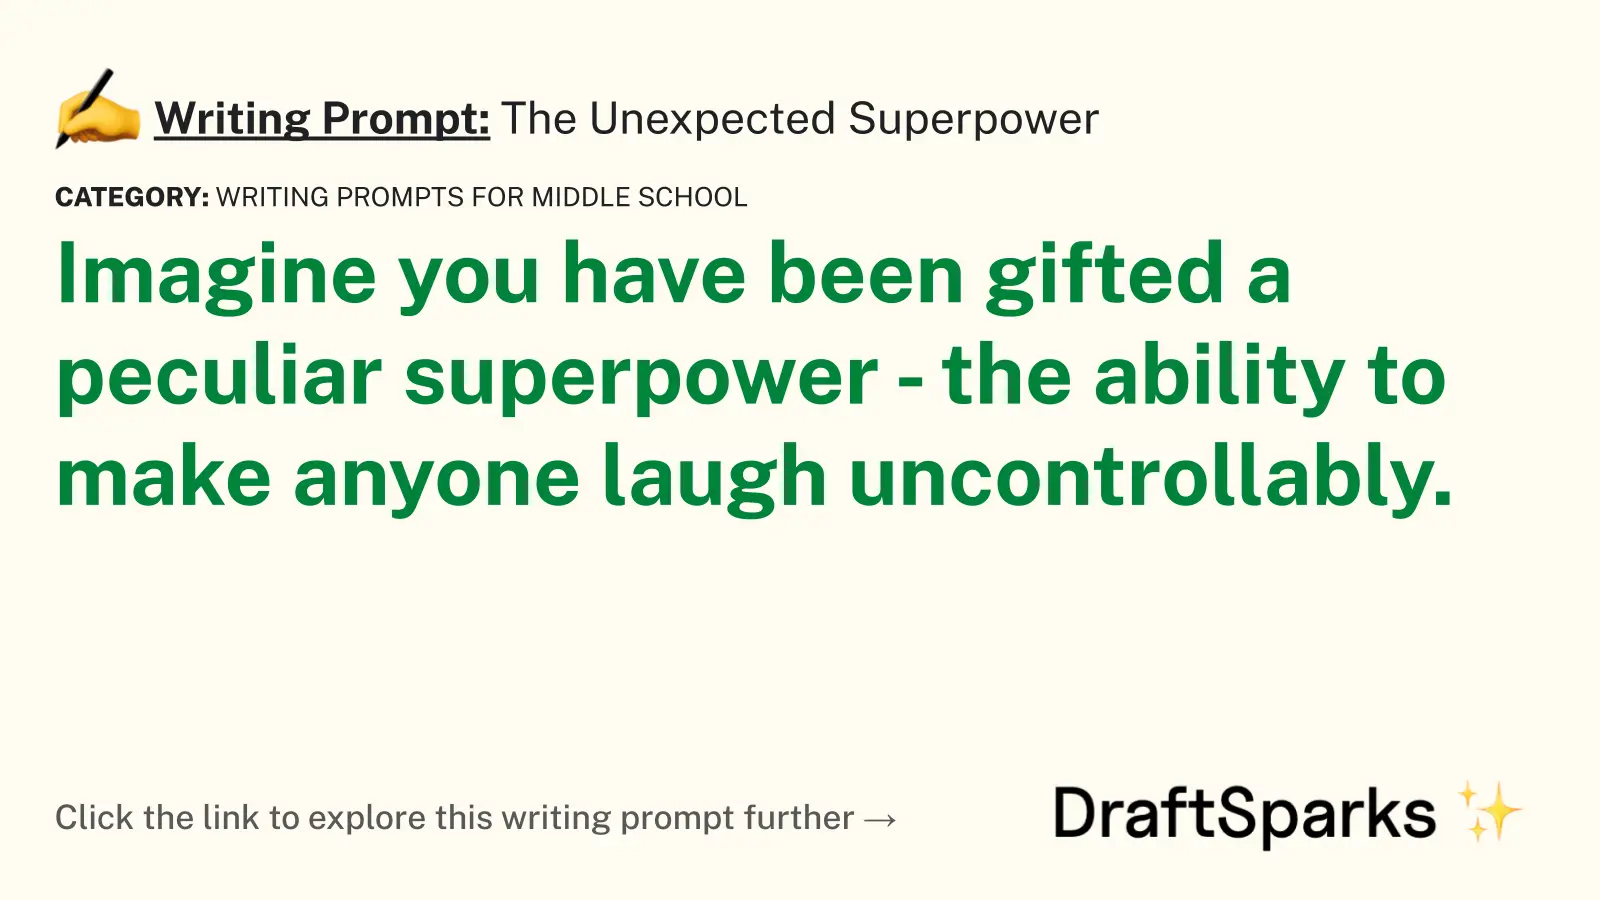 The Unexpected Superpower